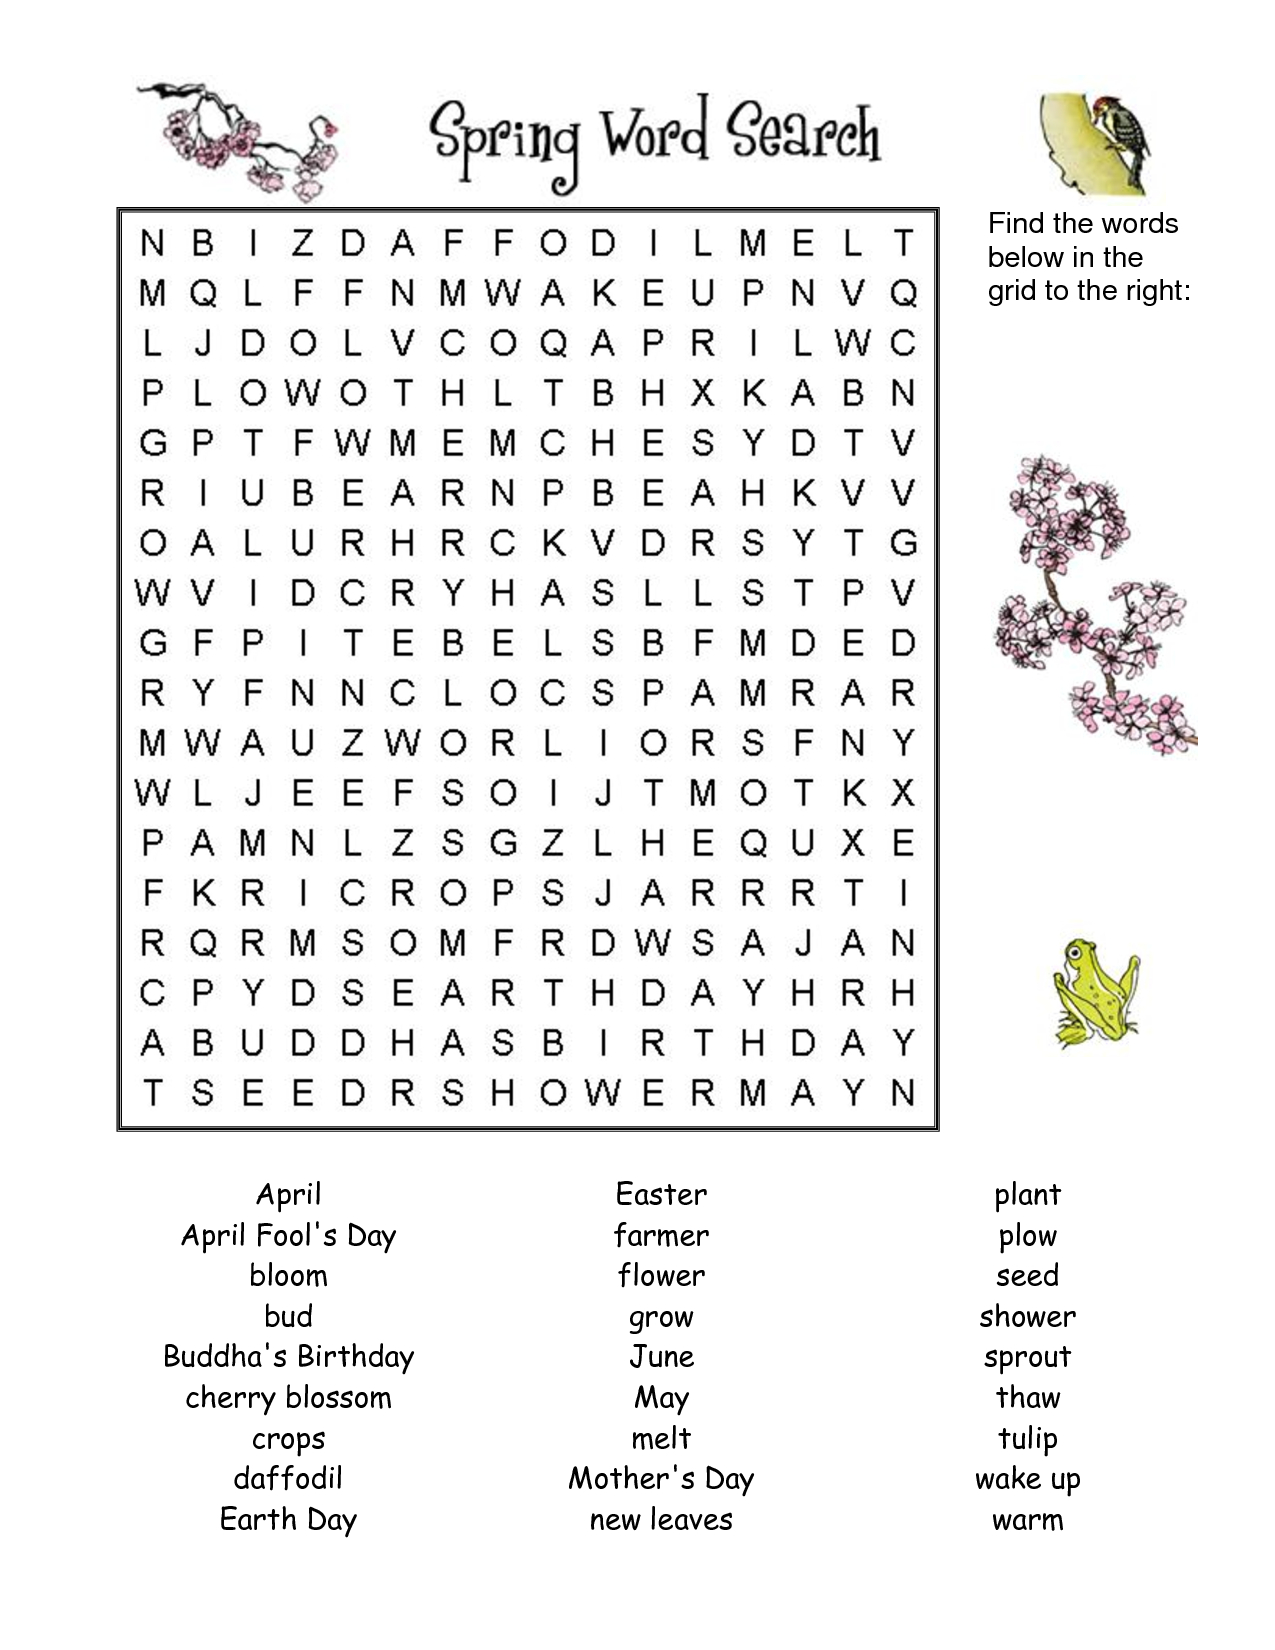 7 Printable Spring Word Searches | Kittybabylove - Printable Spring Puzzle